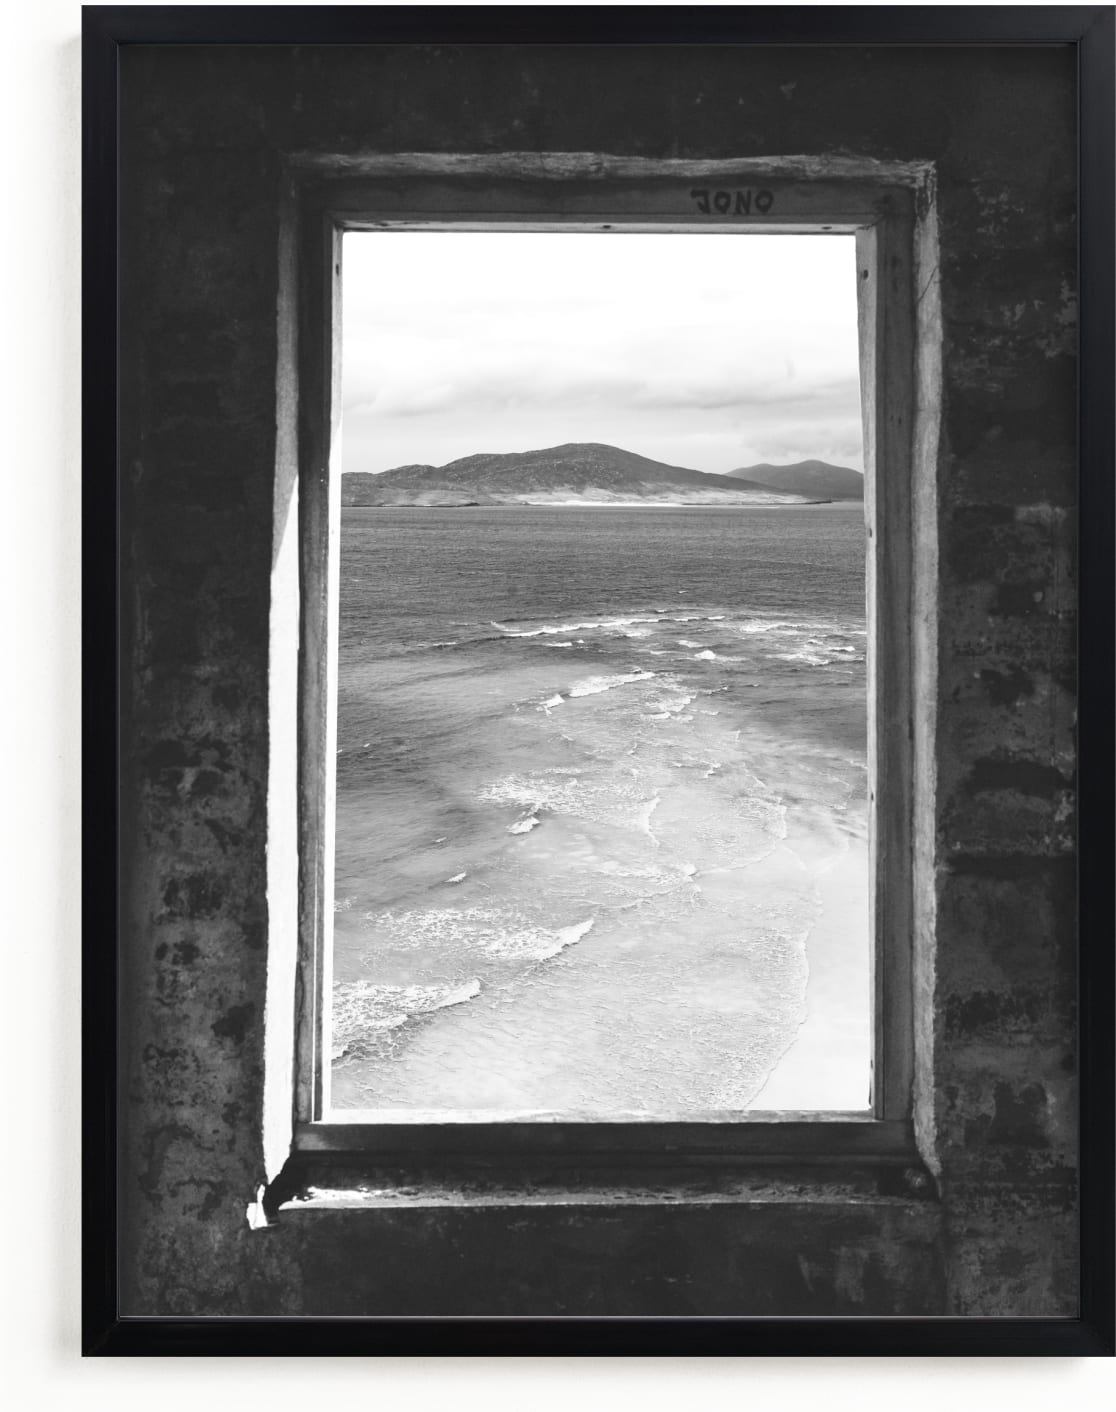 This is a black and white art by Kamala Nahas called Room With a View I.